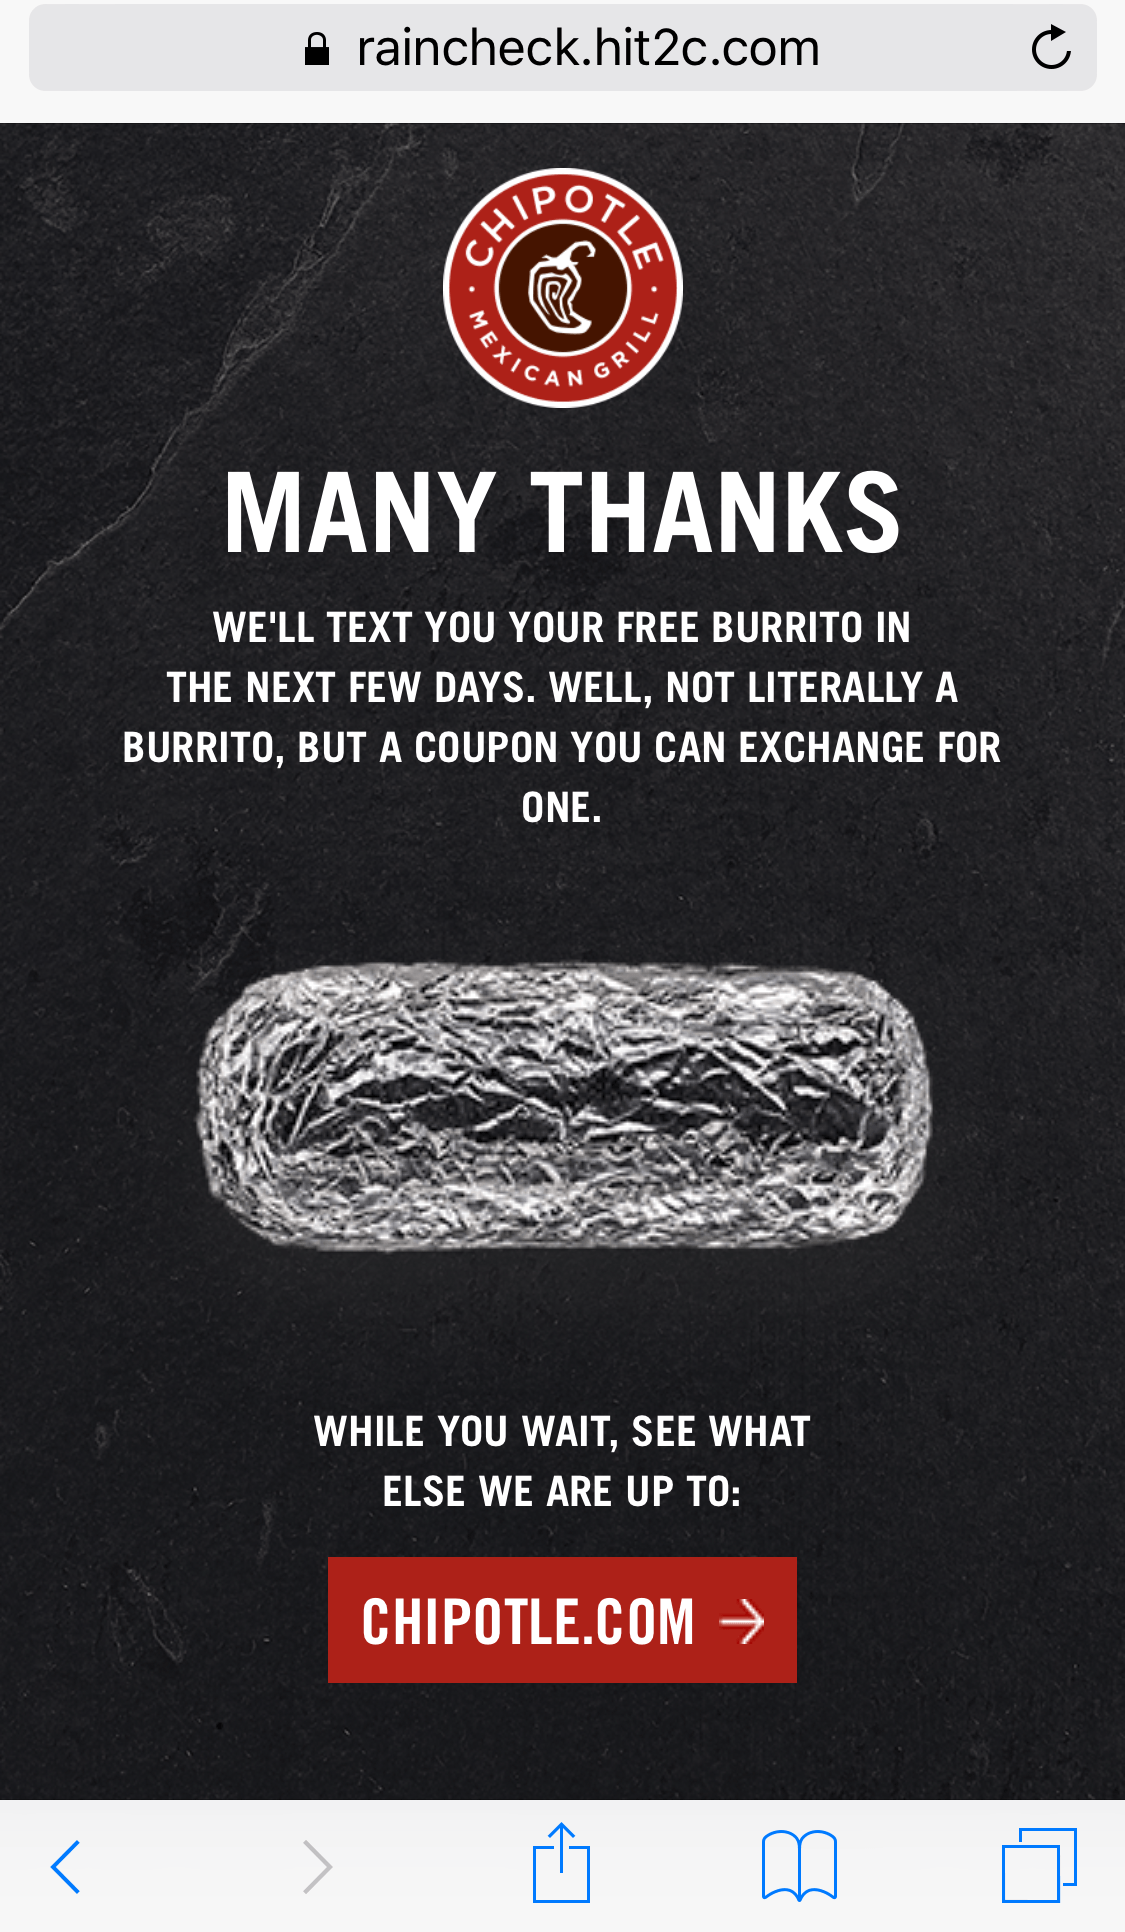 Chipotle SMS Coupon - Thank You Page